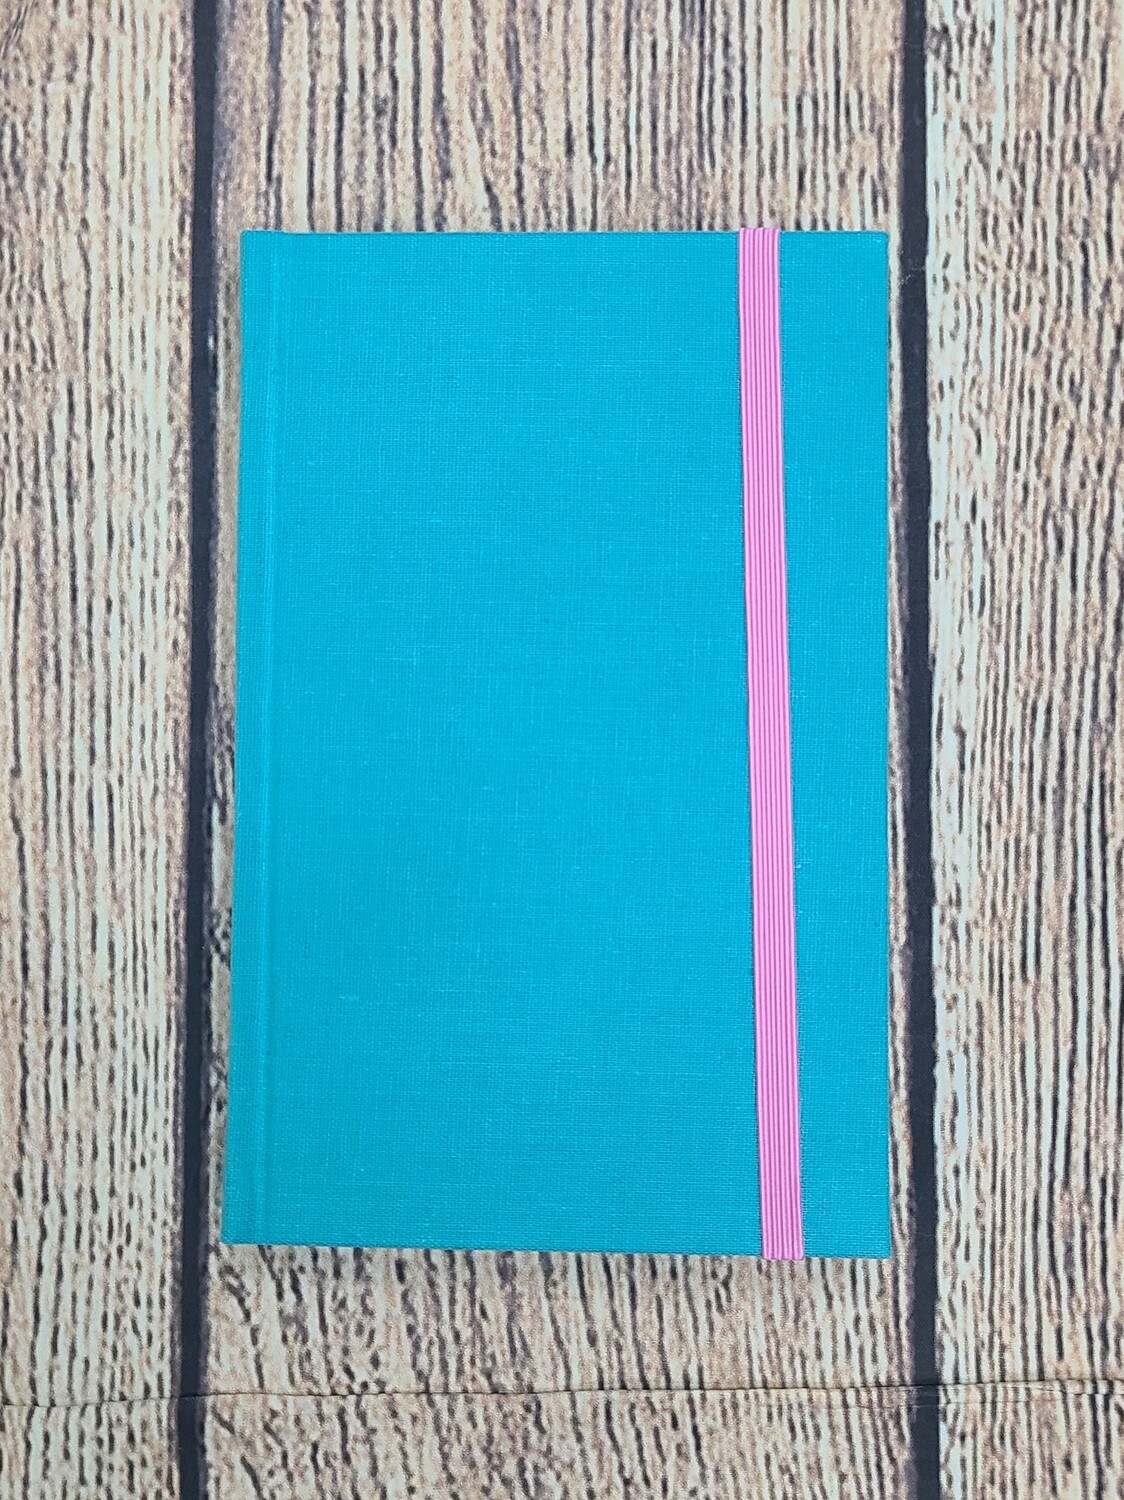 ESV Thinline Bible - Turquoise Hardcover Cloth Over Board